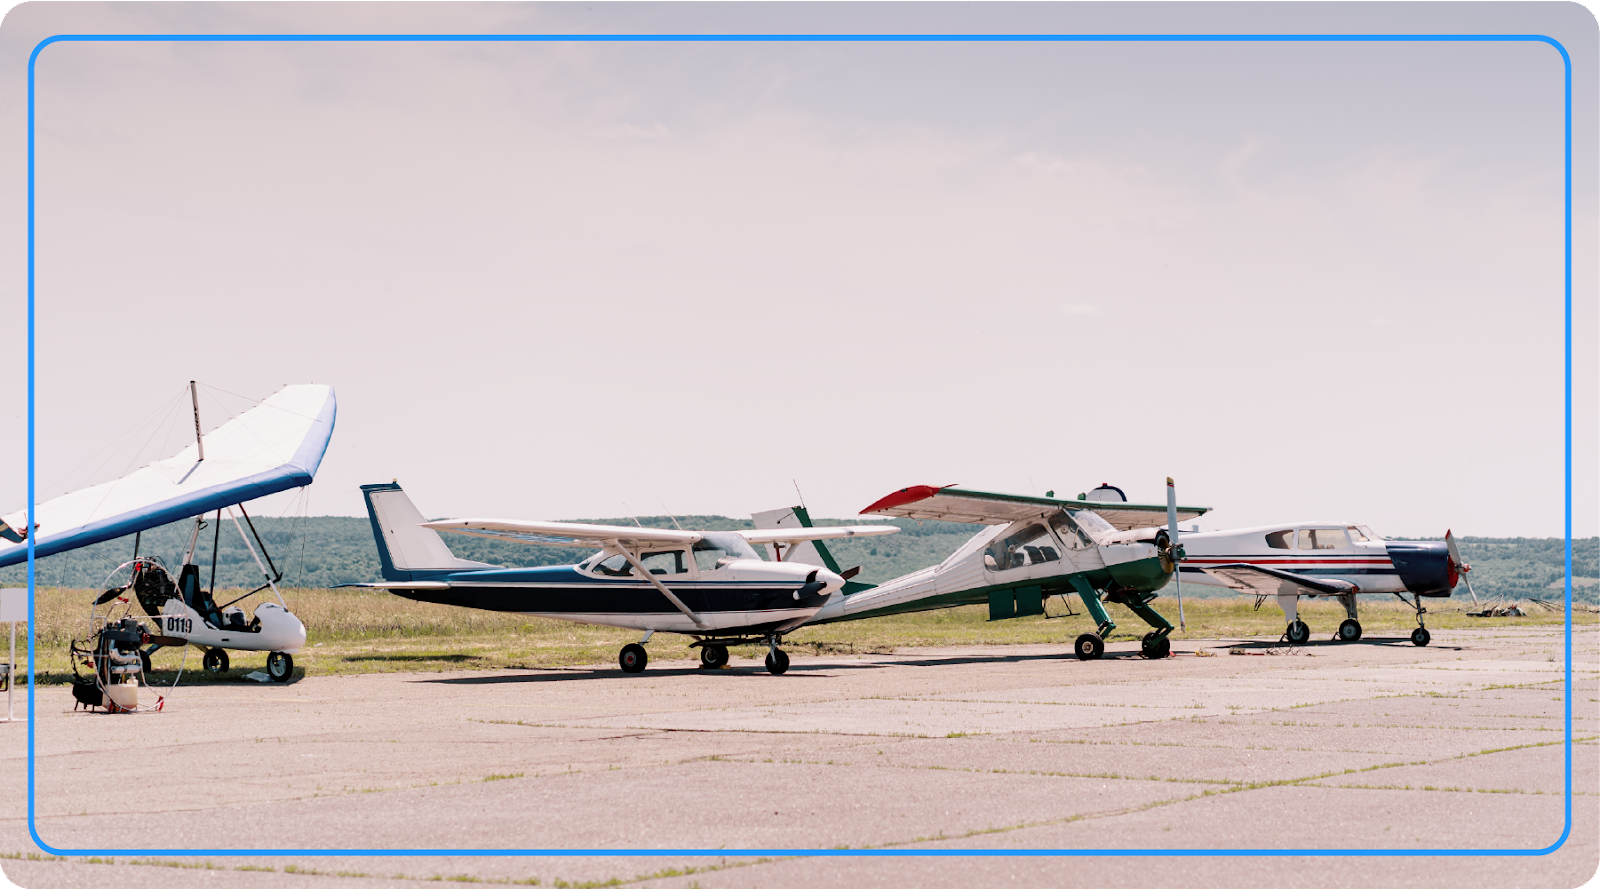 General aviation aircraft lined up at a small airport.